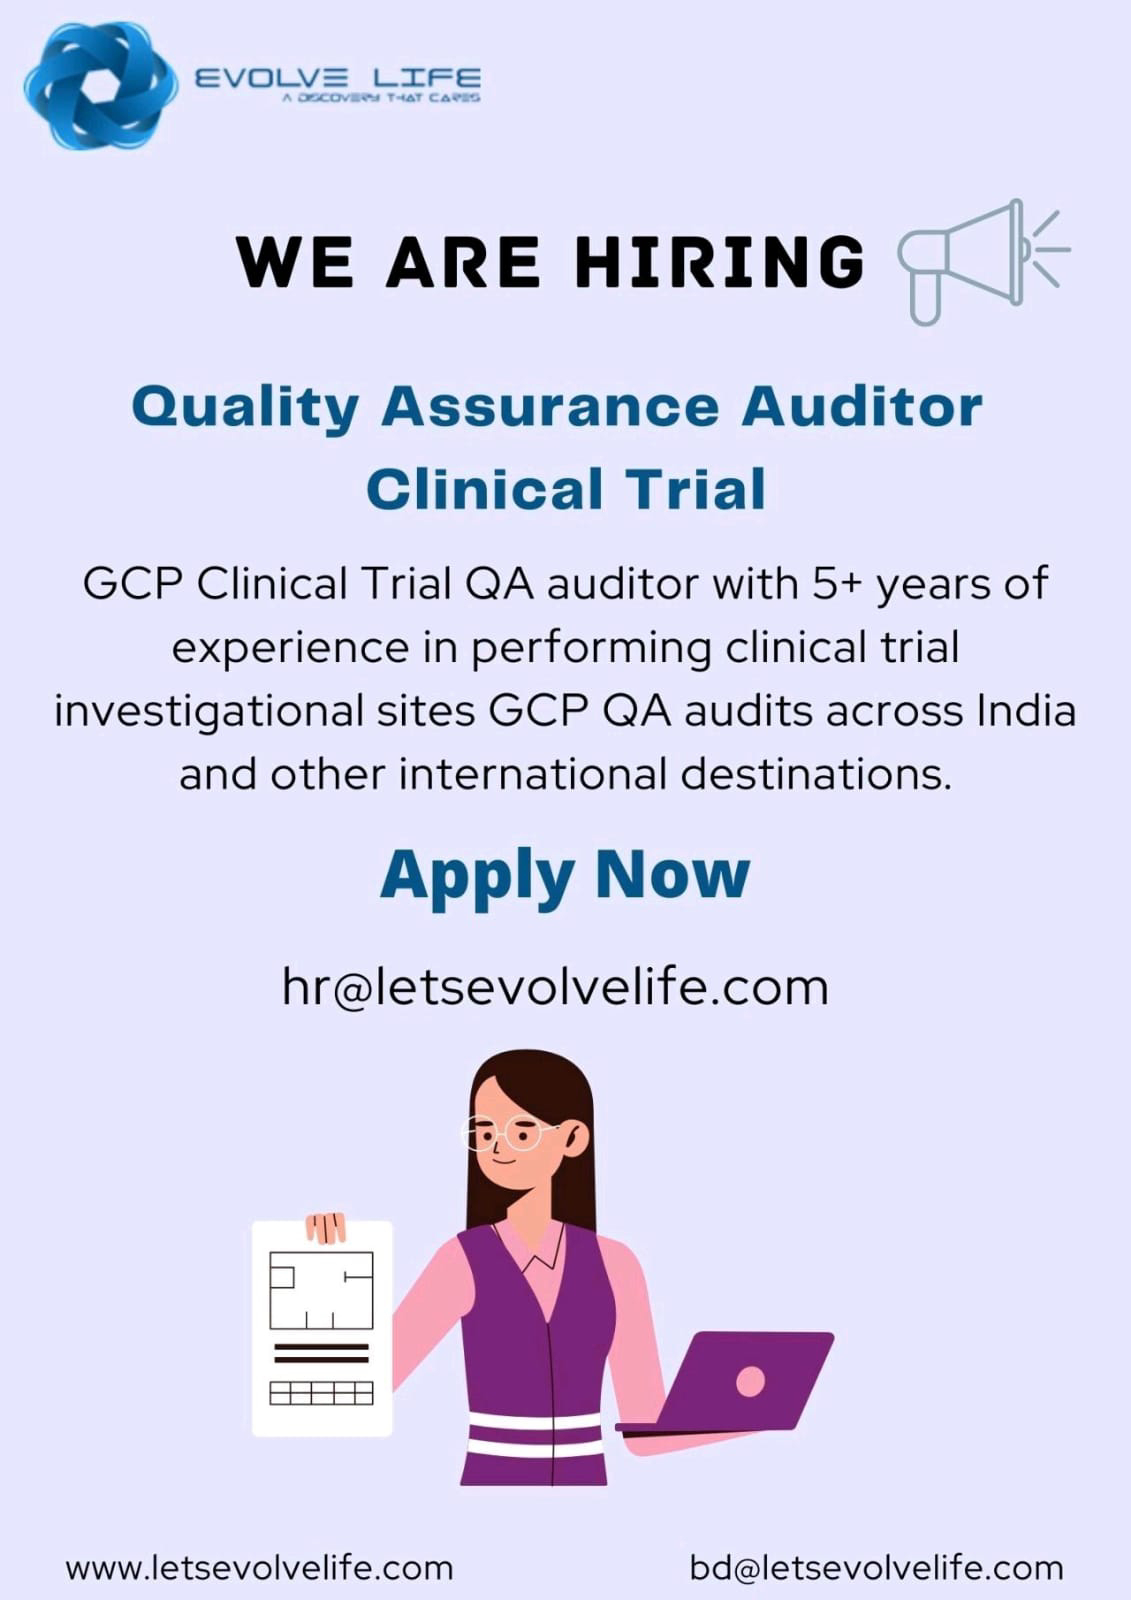 Job Available's for Evolve Life Job Vacancy for Quality Assurance Auditor Clinical Trial